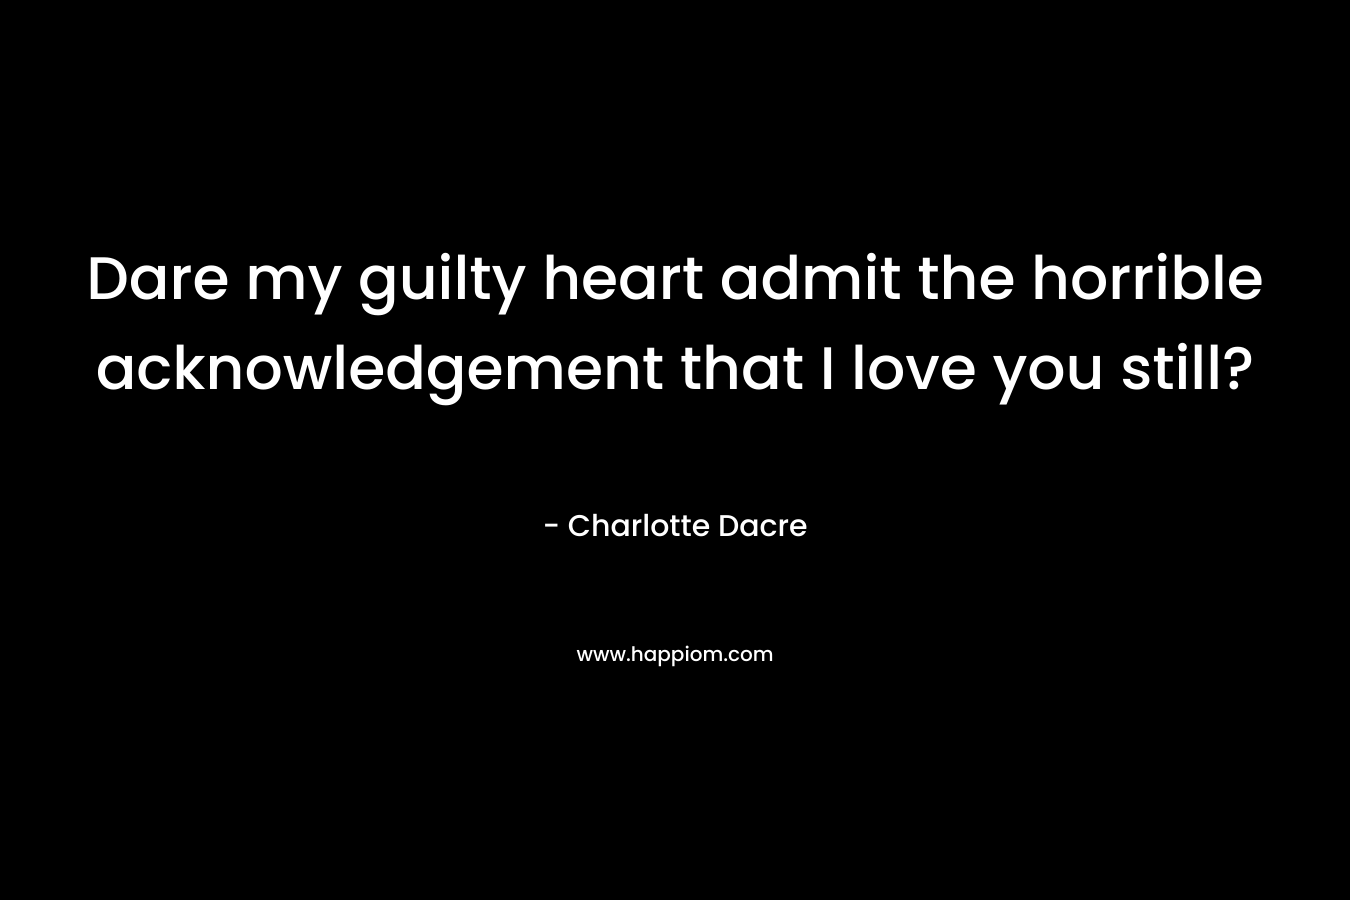 Dare my guilty heart admit the horrible acknowledgement that I love you still?